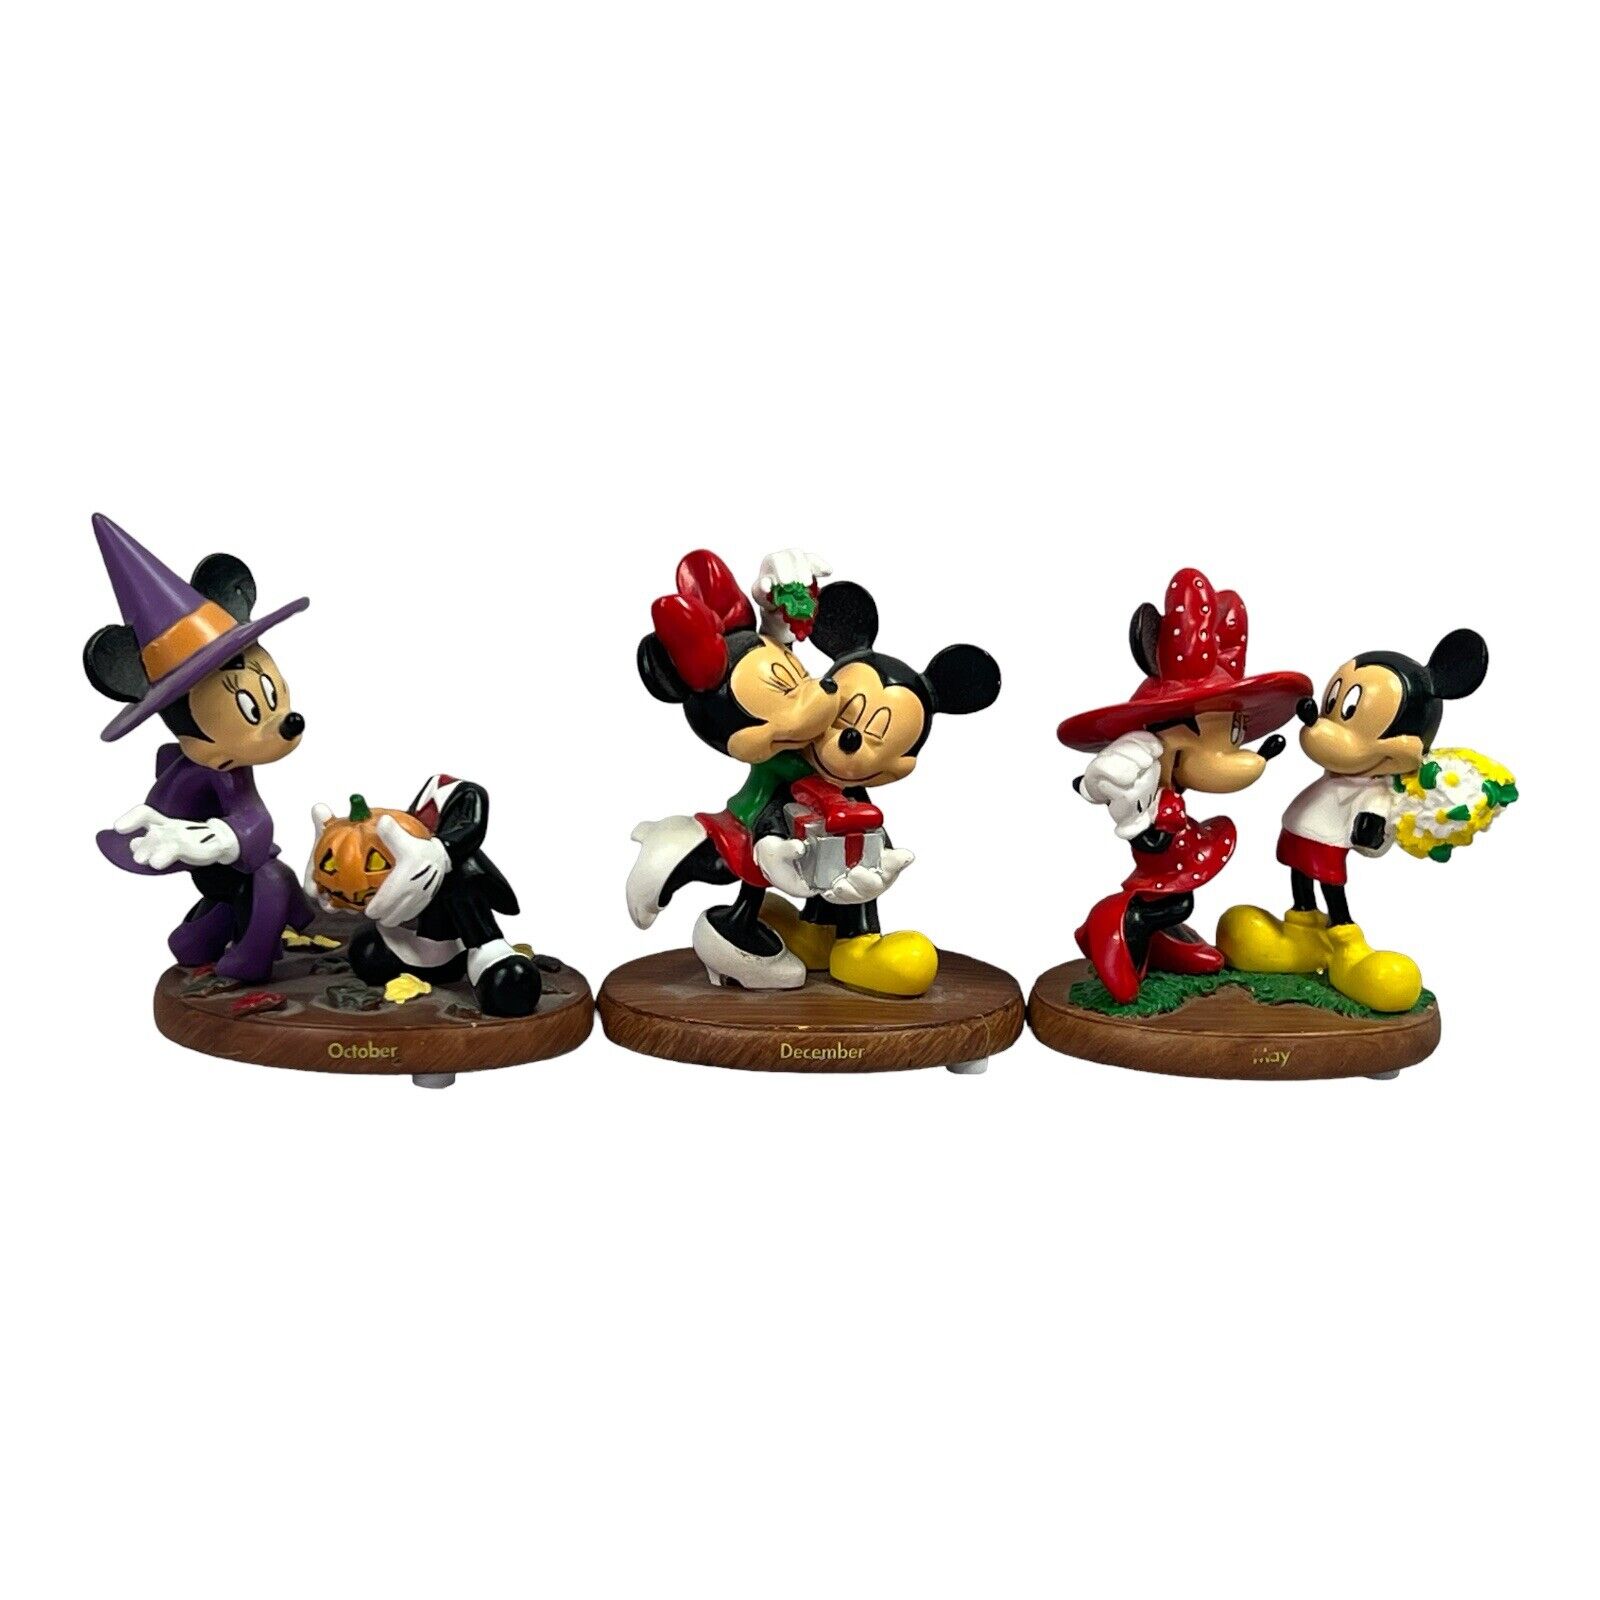 Bradford Exchange Mickey and Minnie Forever lot of 3 limited edition collectable